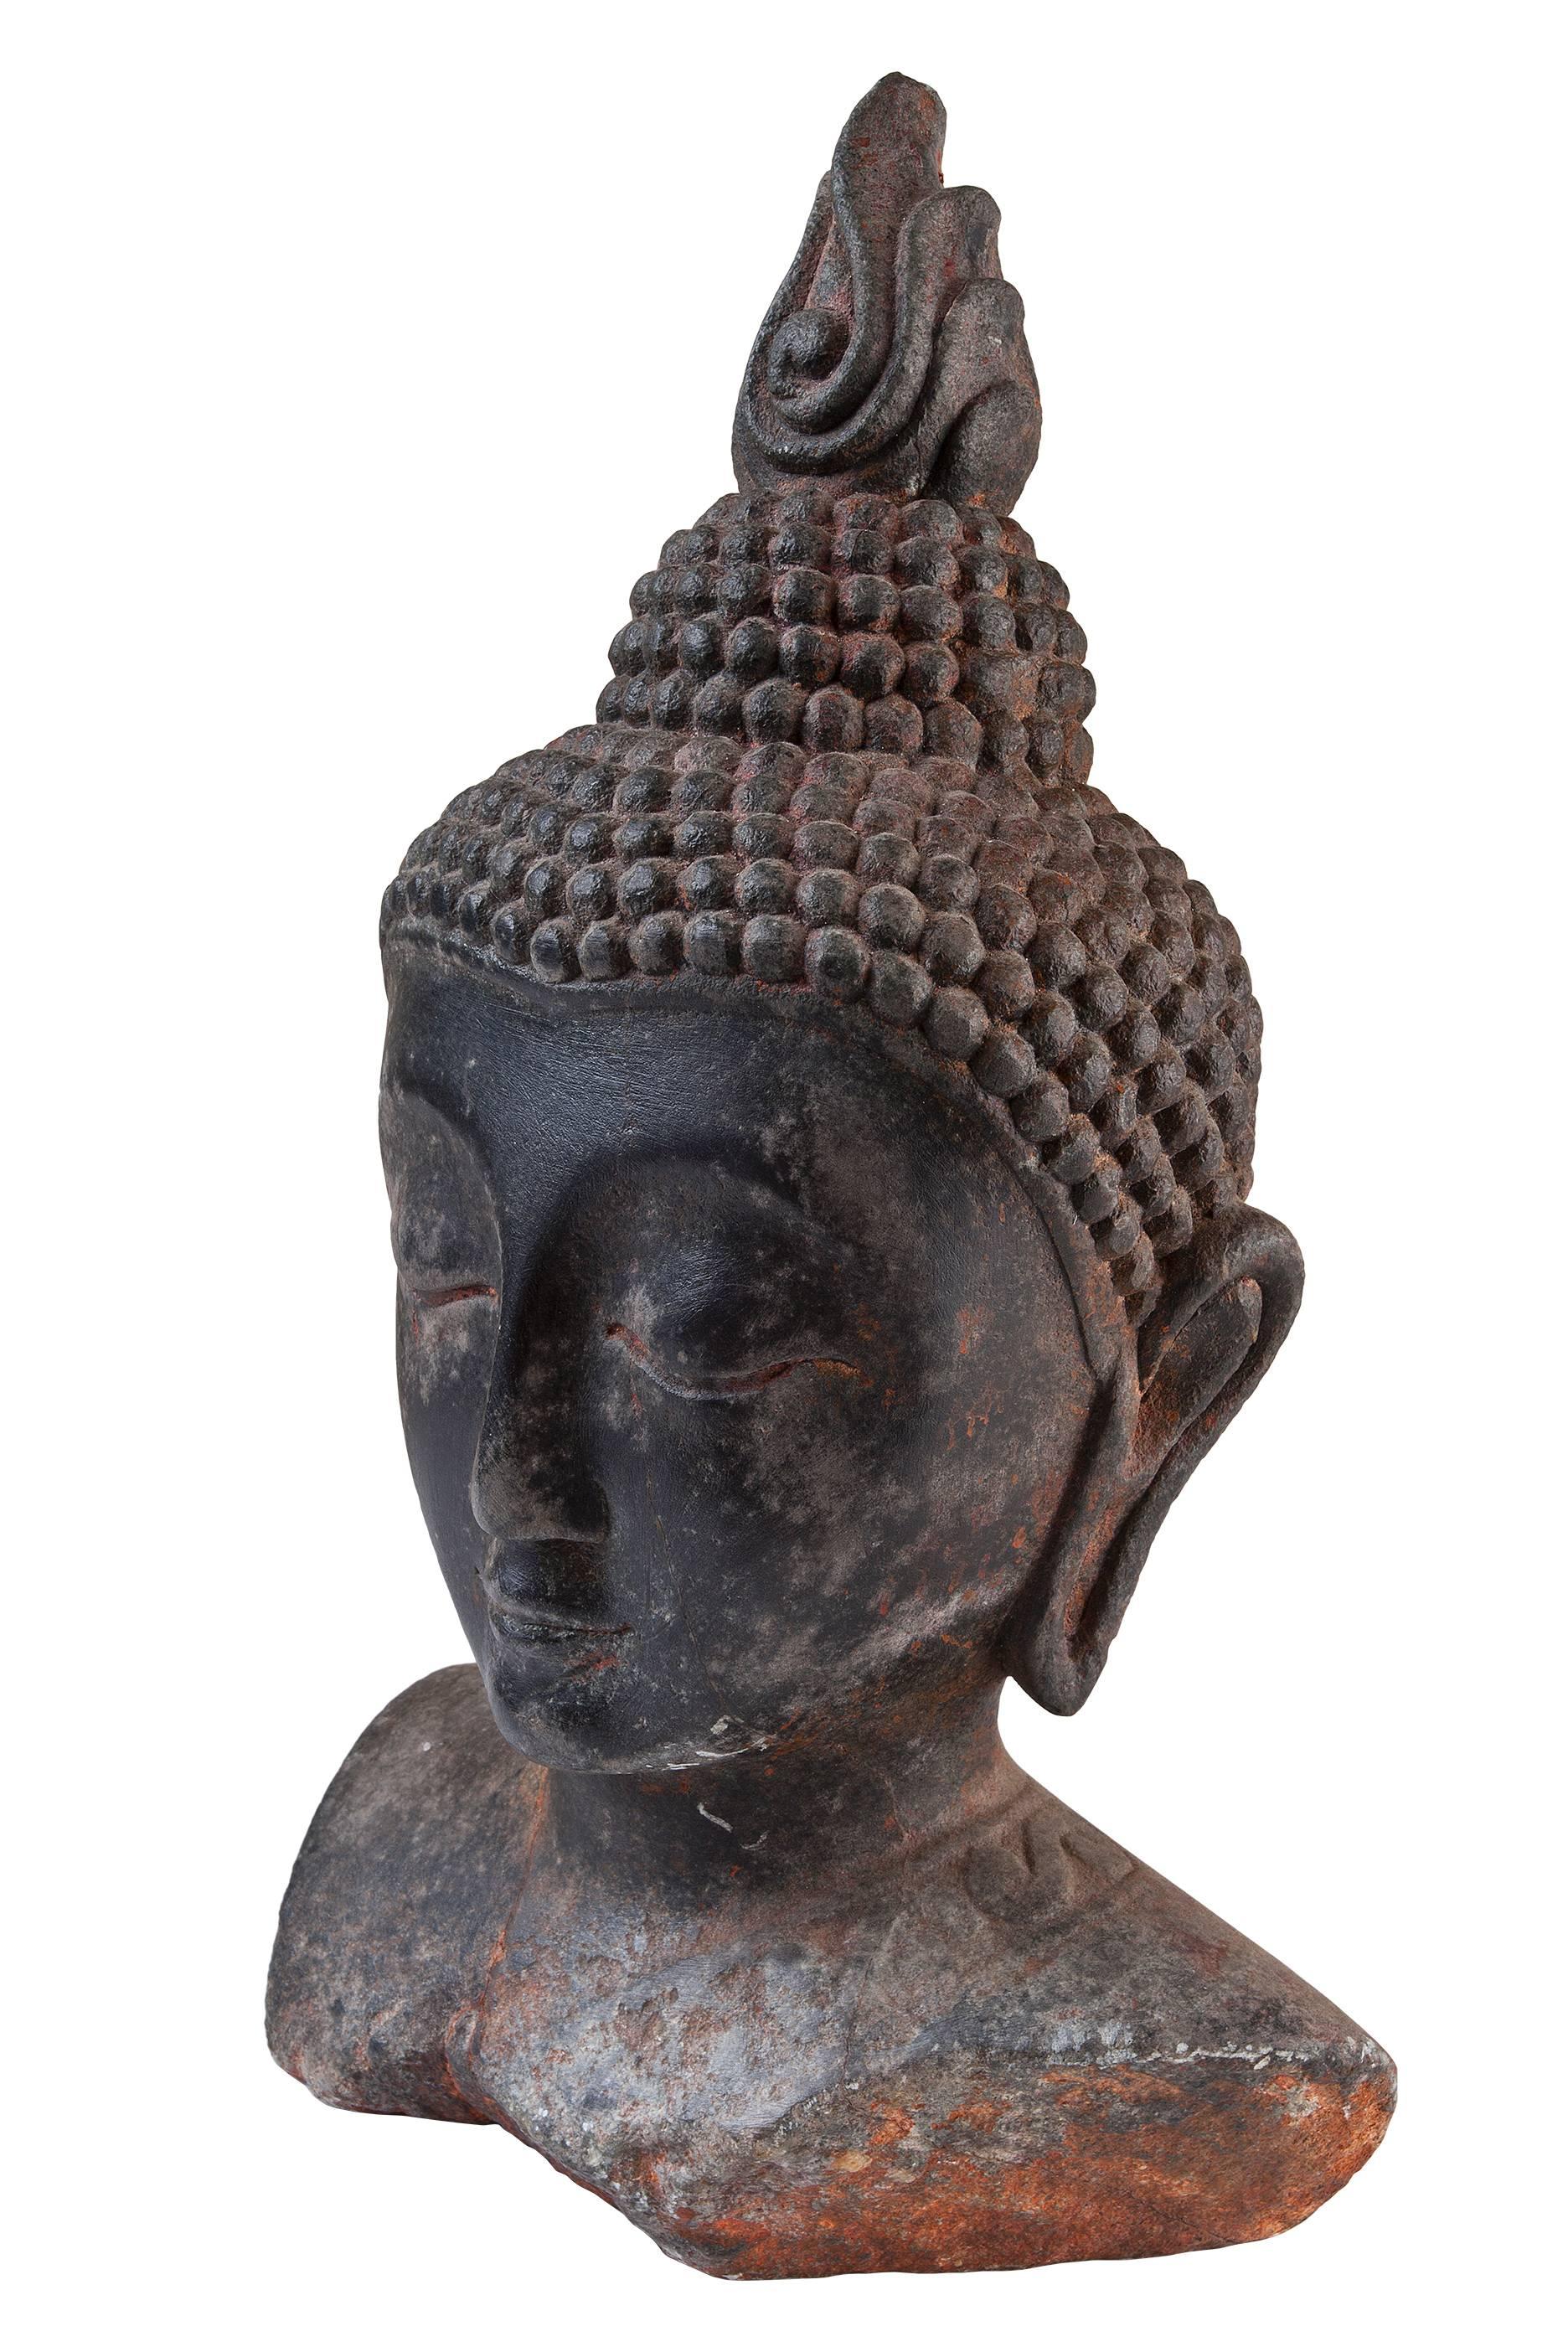 A beautiful Thai Buddha head made of stone with excellent patina dating from the early 1900's. Features include the typical curled hair, elongated ears and half-closed eyes. The ushnisha crown with flame depicts the wisdom and illumination after